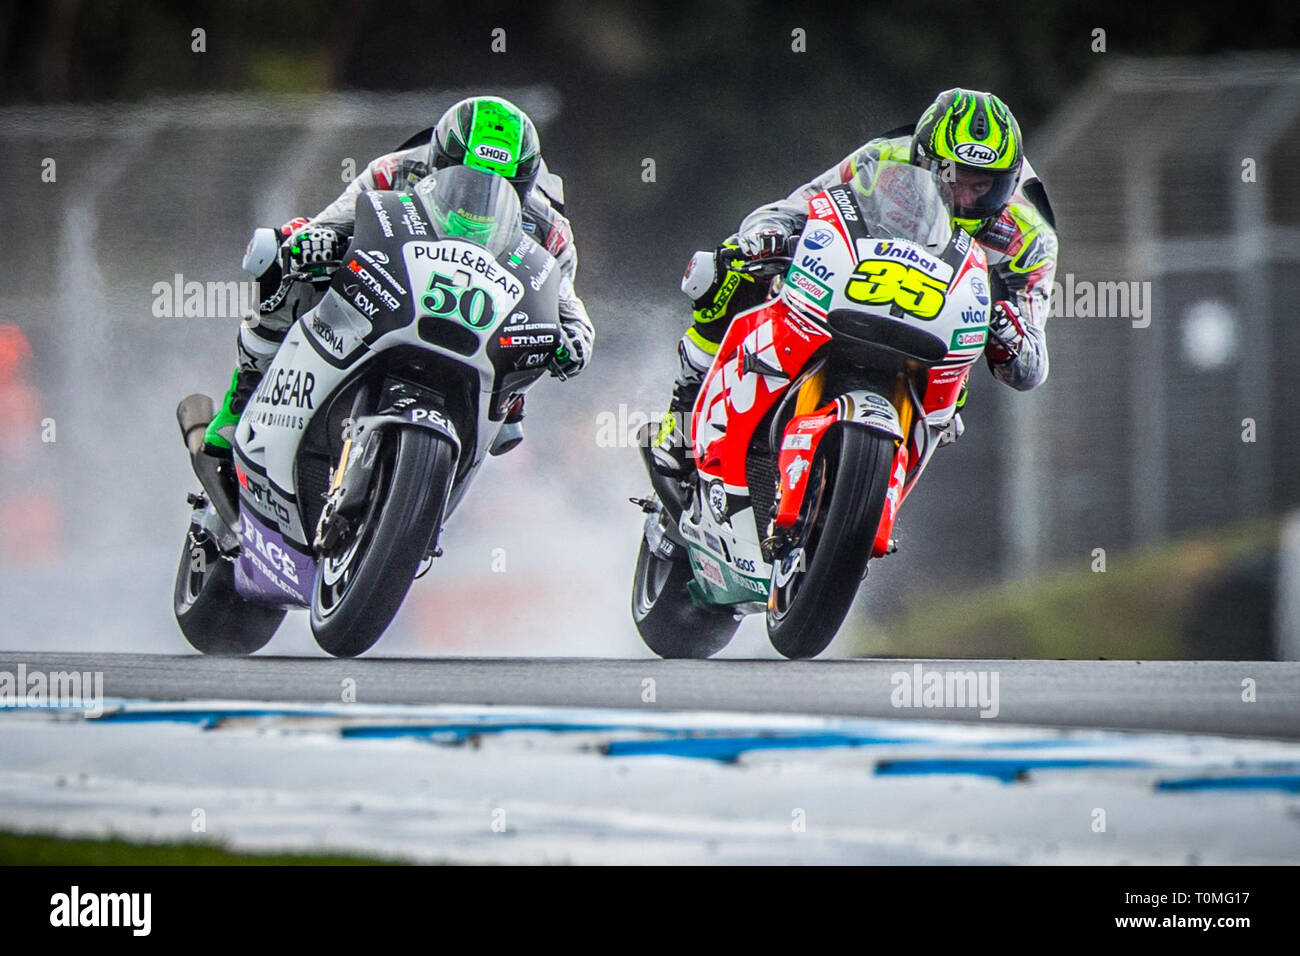 Phillip Island, Australia. 22nd Oct, 2016. English rider Cal Crutchlow(35) and Eugene Laverty (50) at the 2016 Australian Motorcycle Grand Prix. Stock Photo